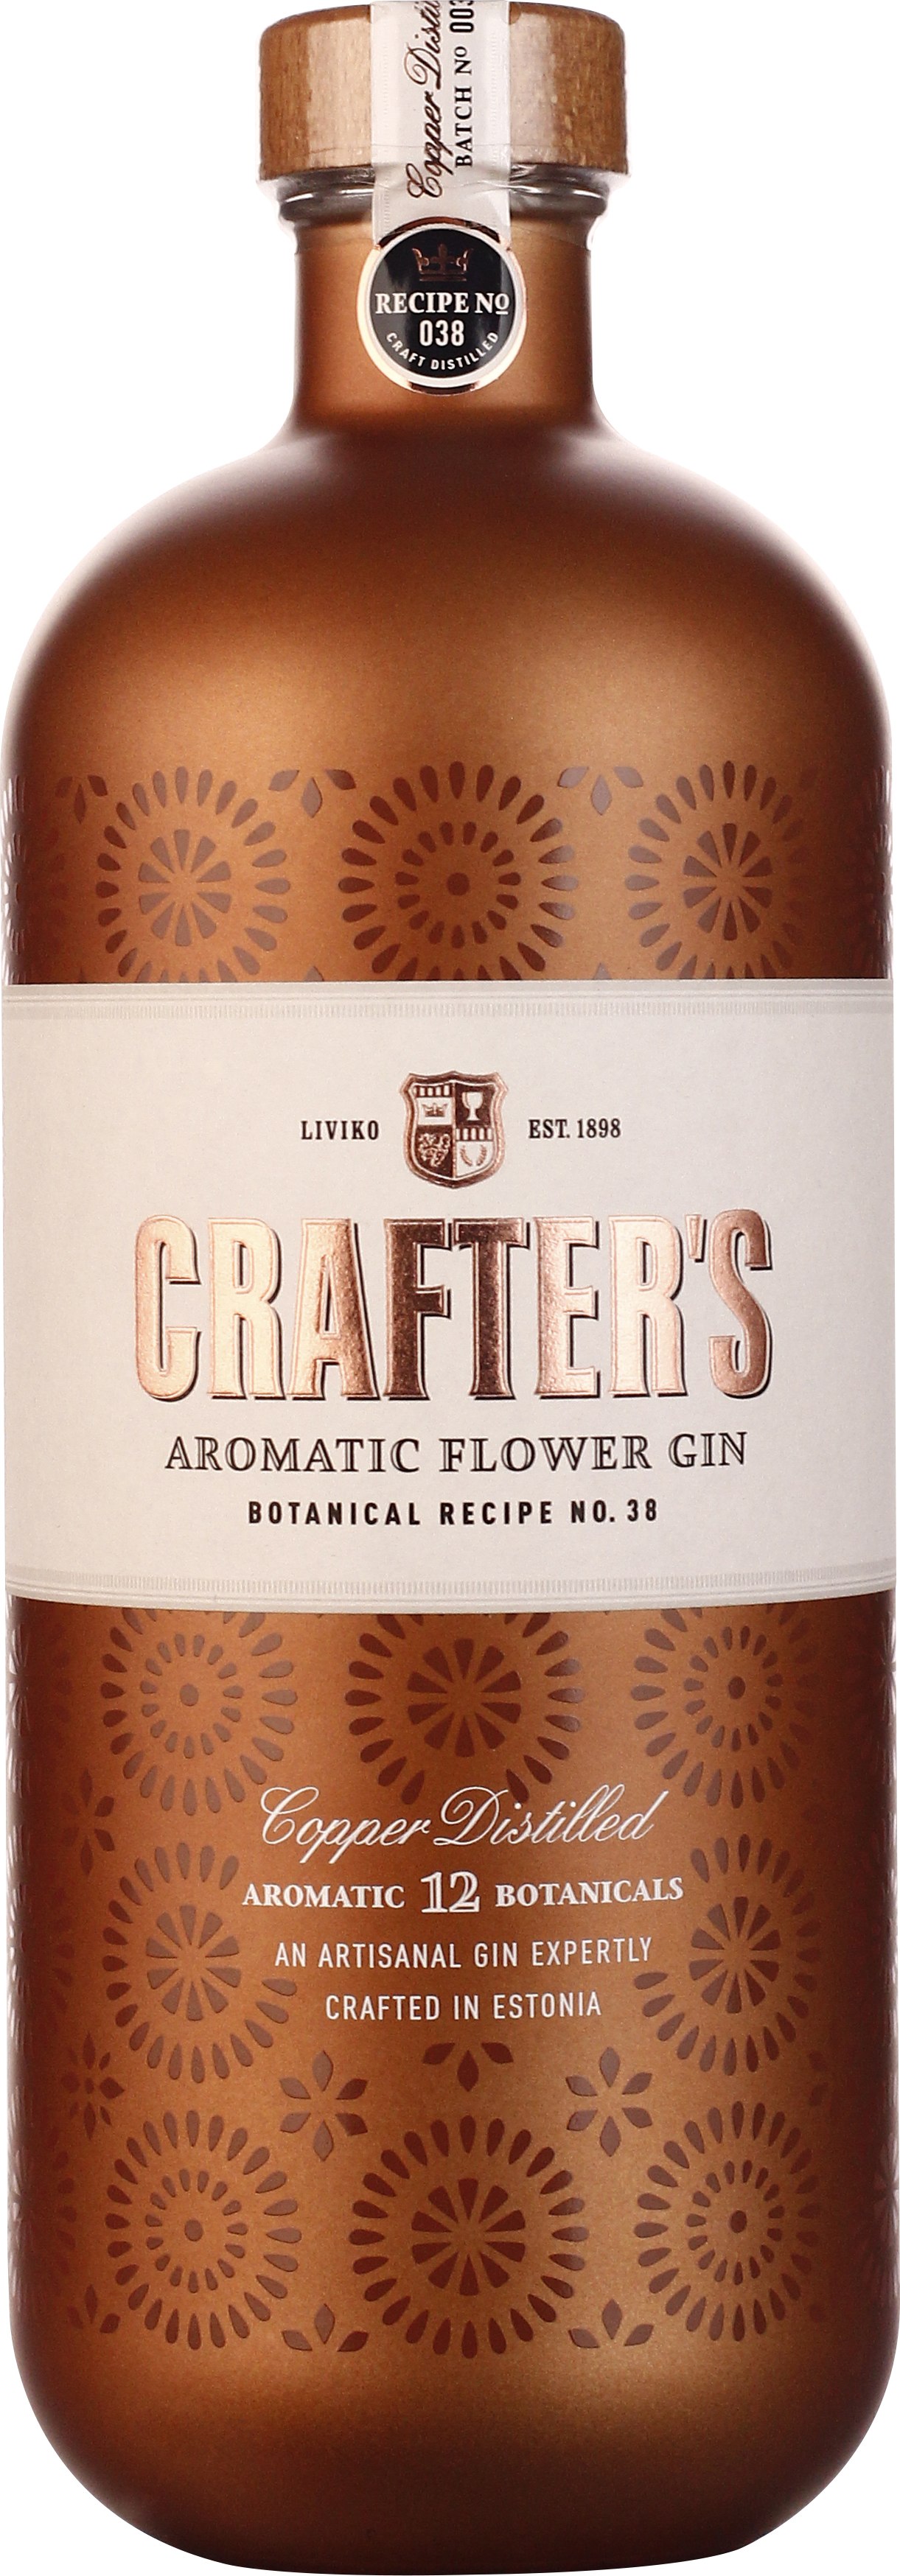 Drankdozijn Crafter's Aromatic Flower Gin 70CL aanbieding